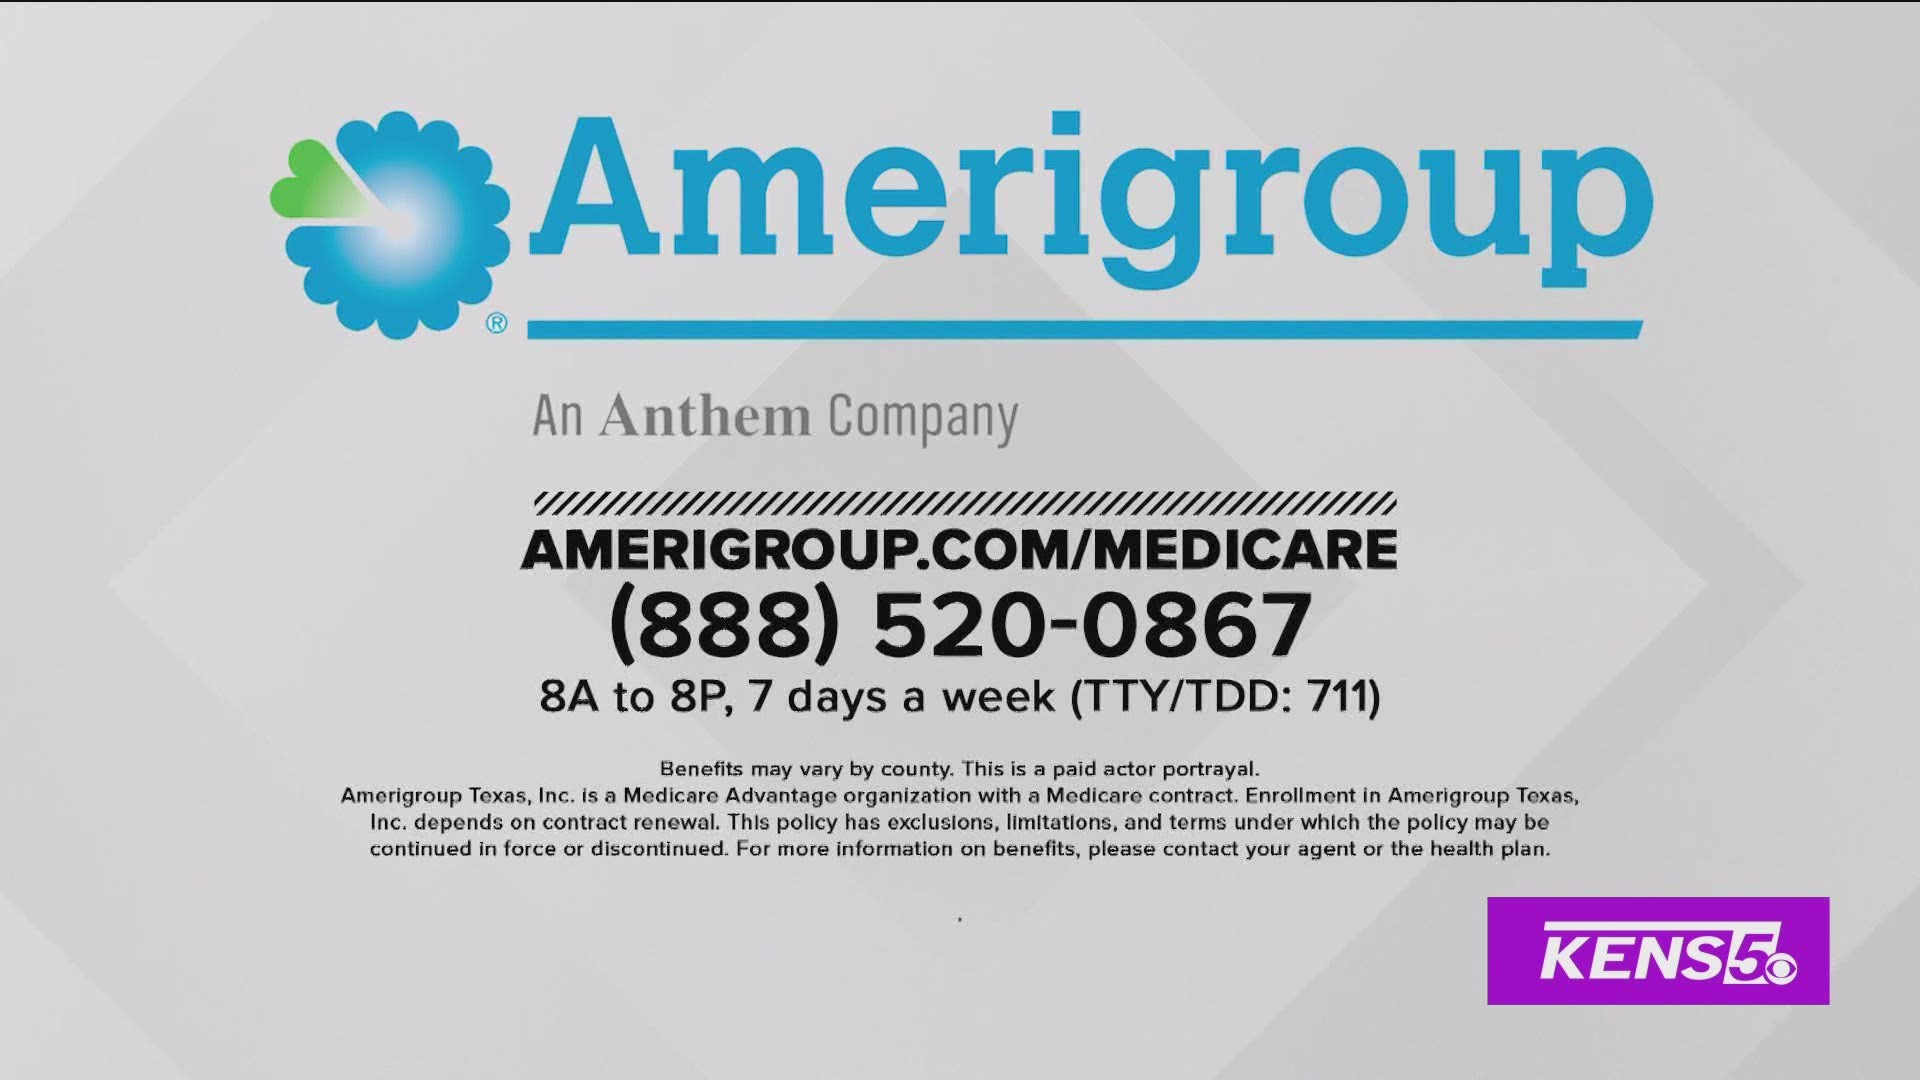 How to take advantage of amerigroup benefits mortgage investors amerigroup mortgage appointment